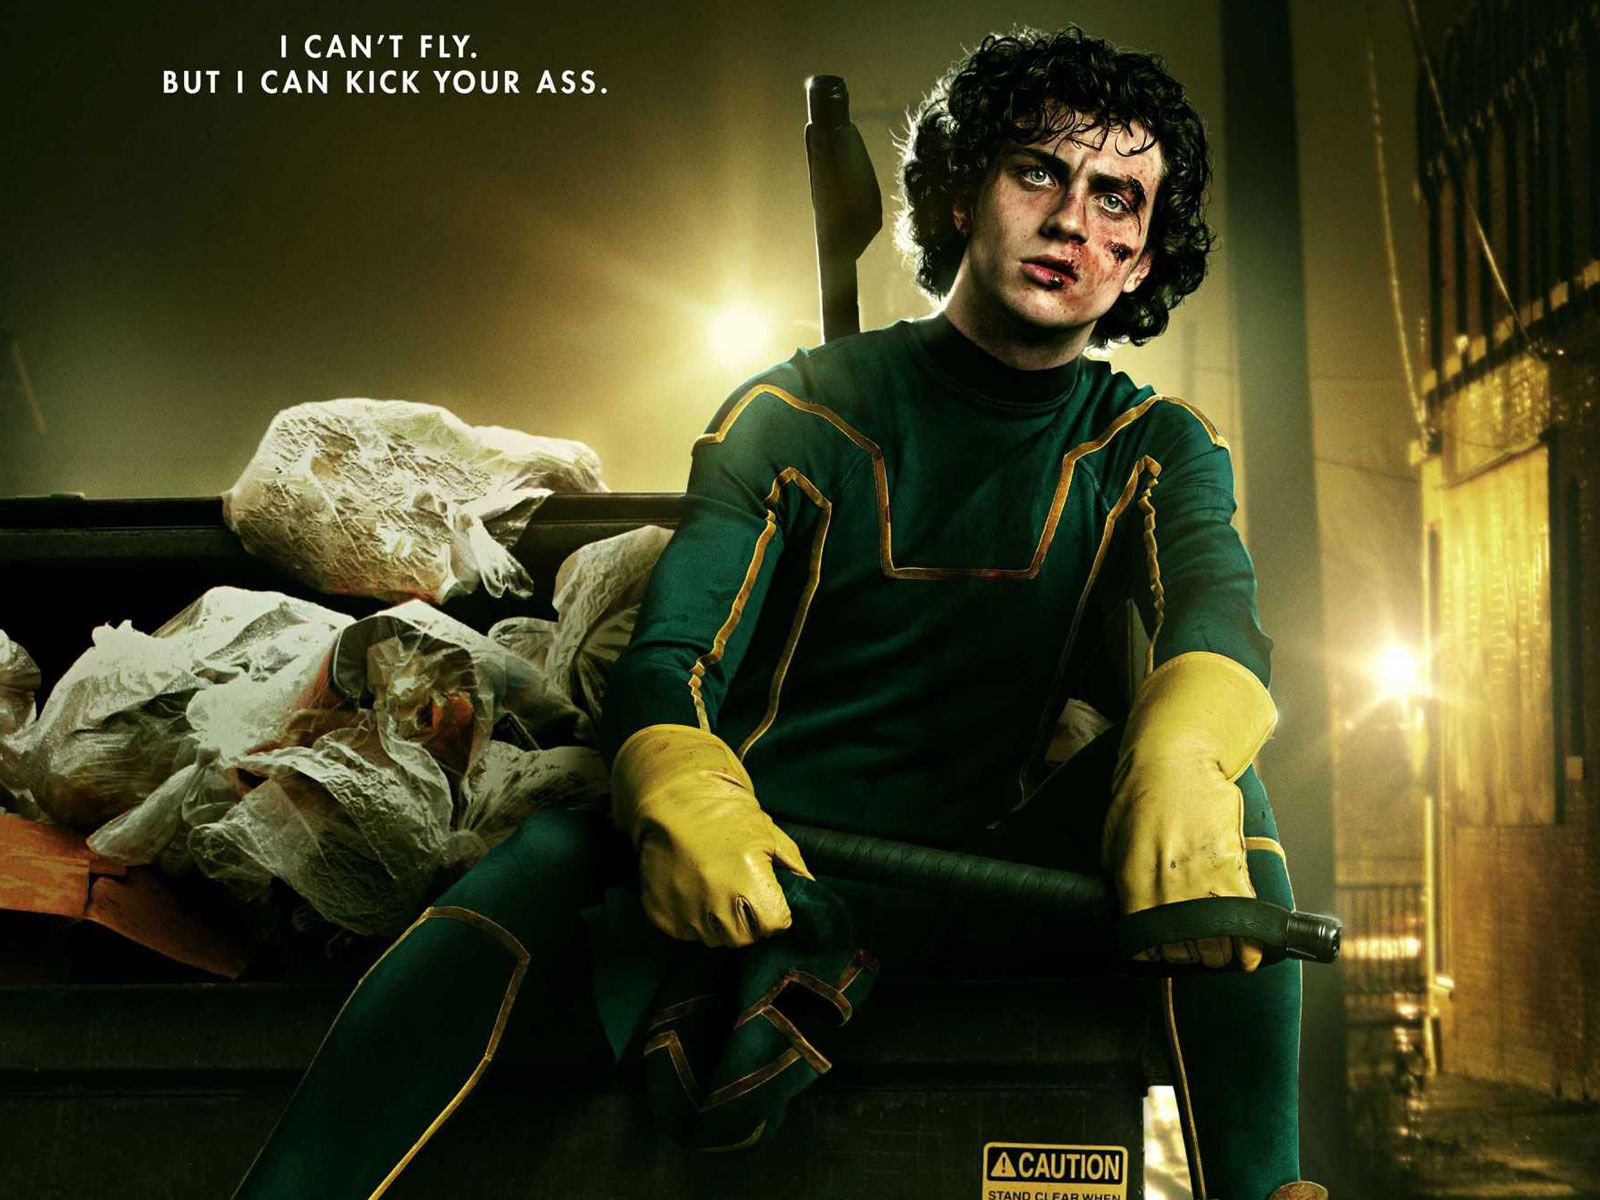 Wallpapers HD Collection From Kick-Ass 2 Movie - WallpaperCare